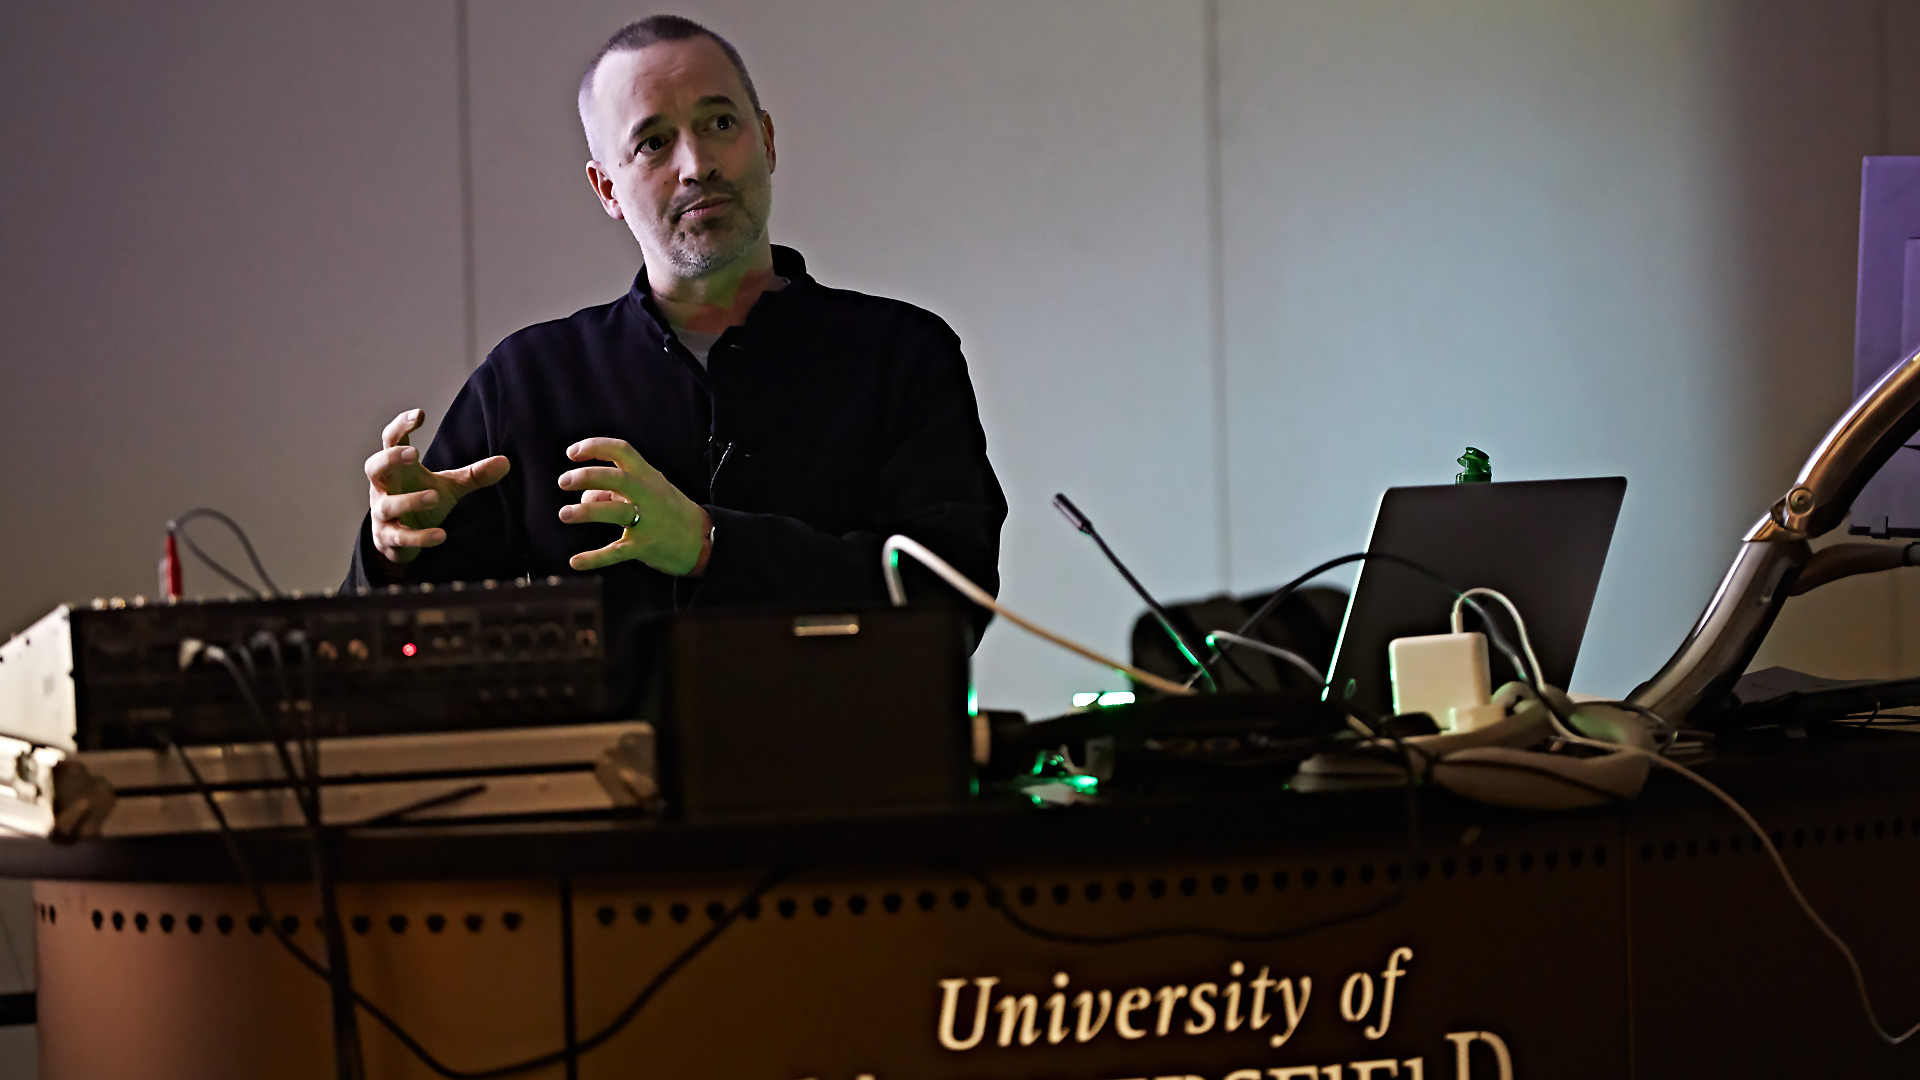 John Warhurst delivers his guest lecture at the University of Huddersfield